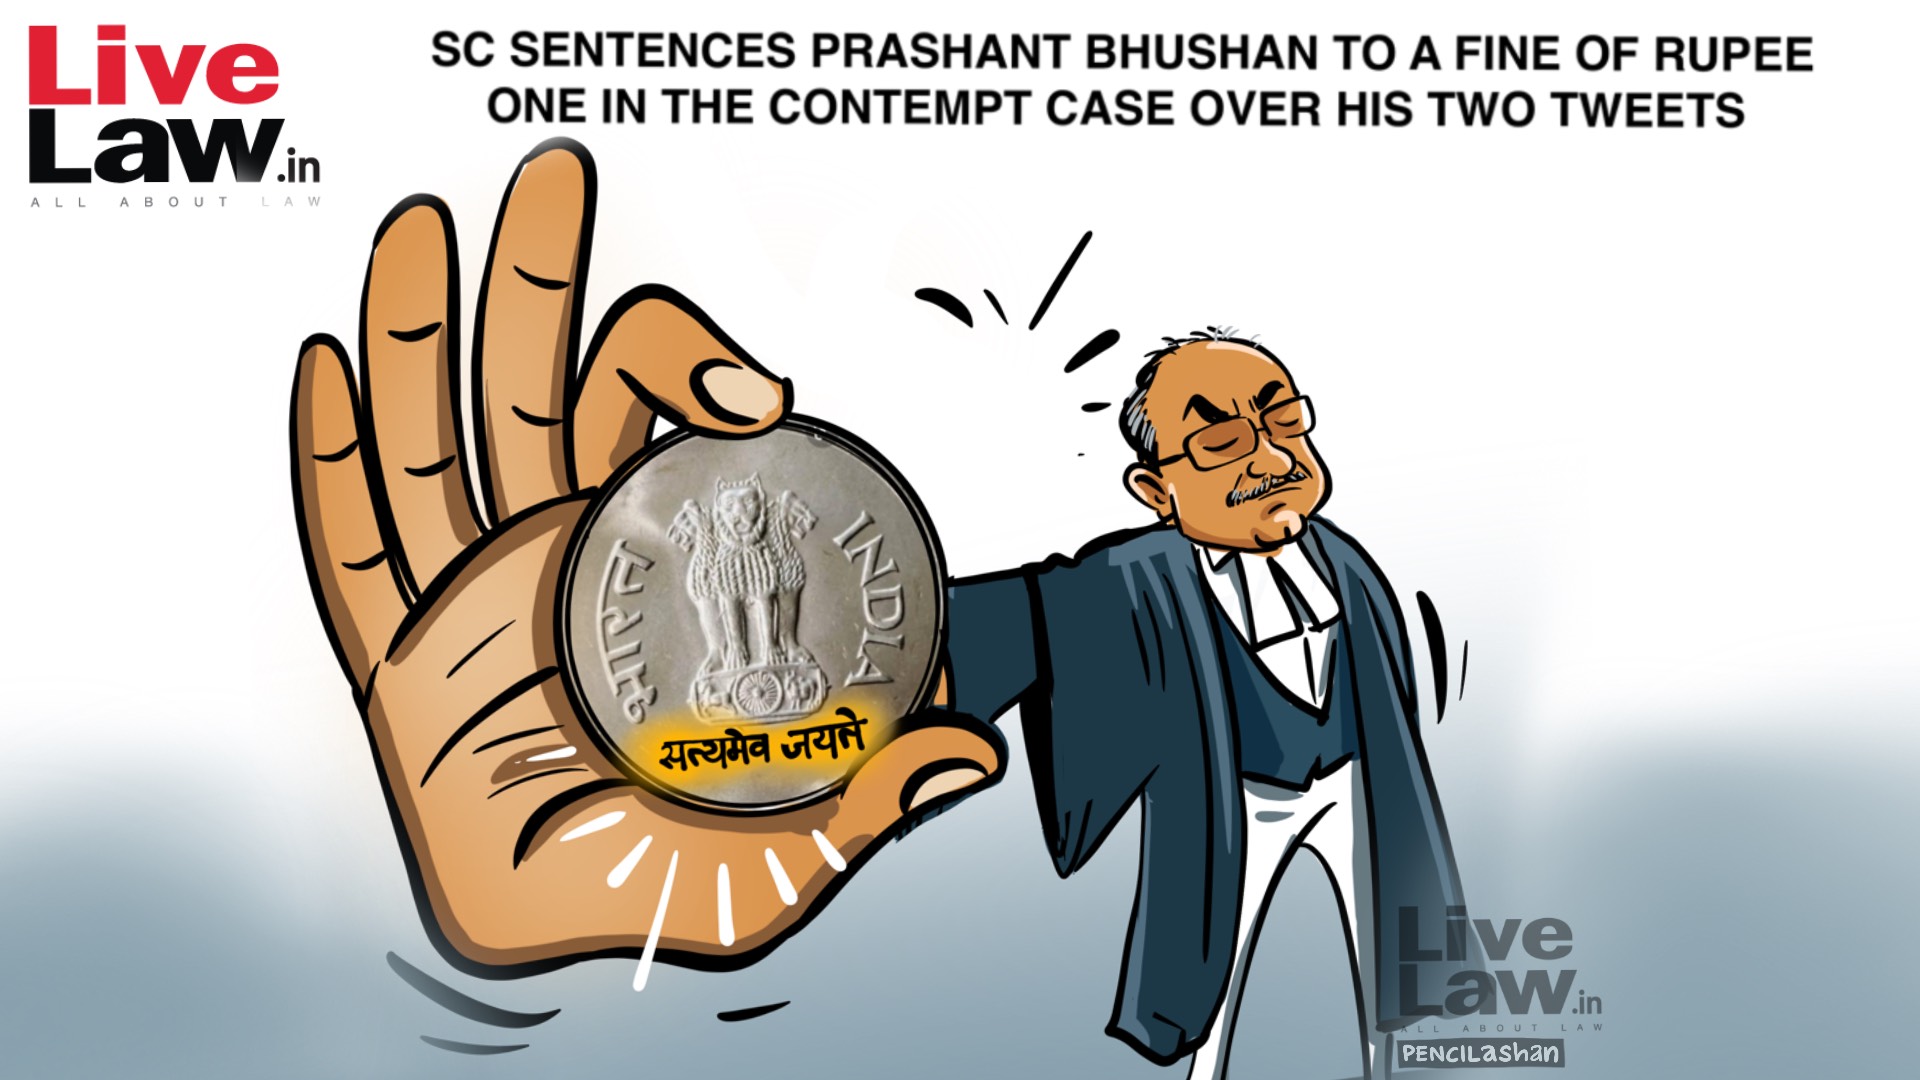 [CARTOON] SC Sentences Prashant Bhushan To A Fine Of Rupee One In The Contempt Case Over His Two Tweets